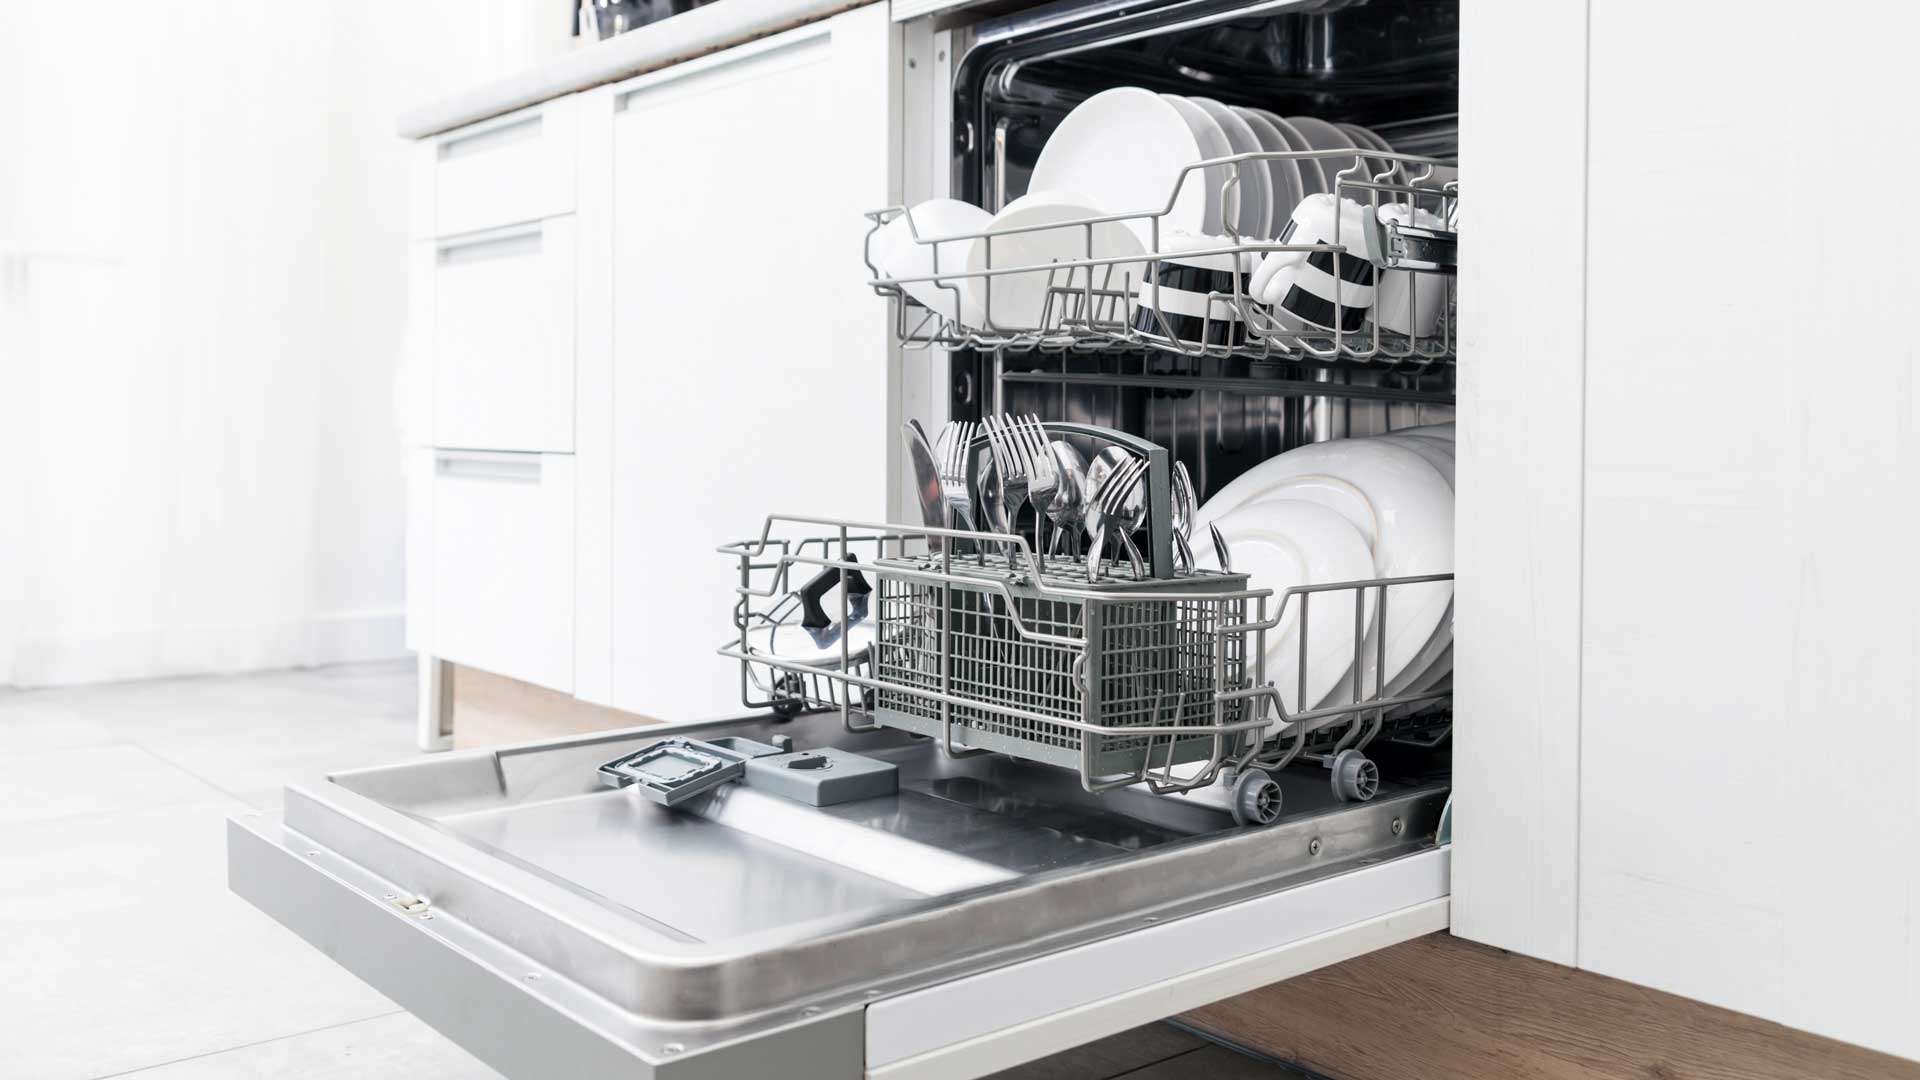 A dishwasher, full of sparkling clean dishes